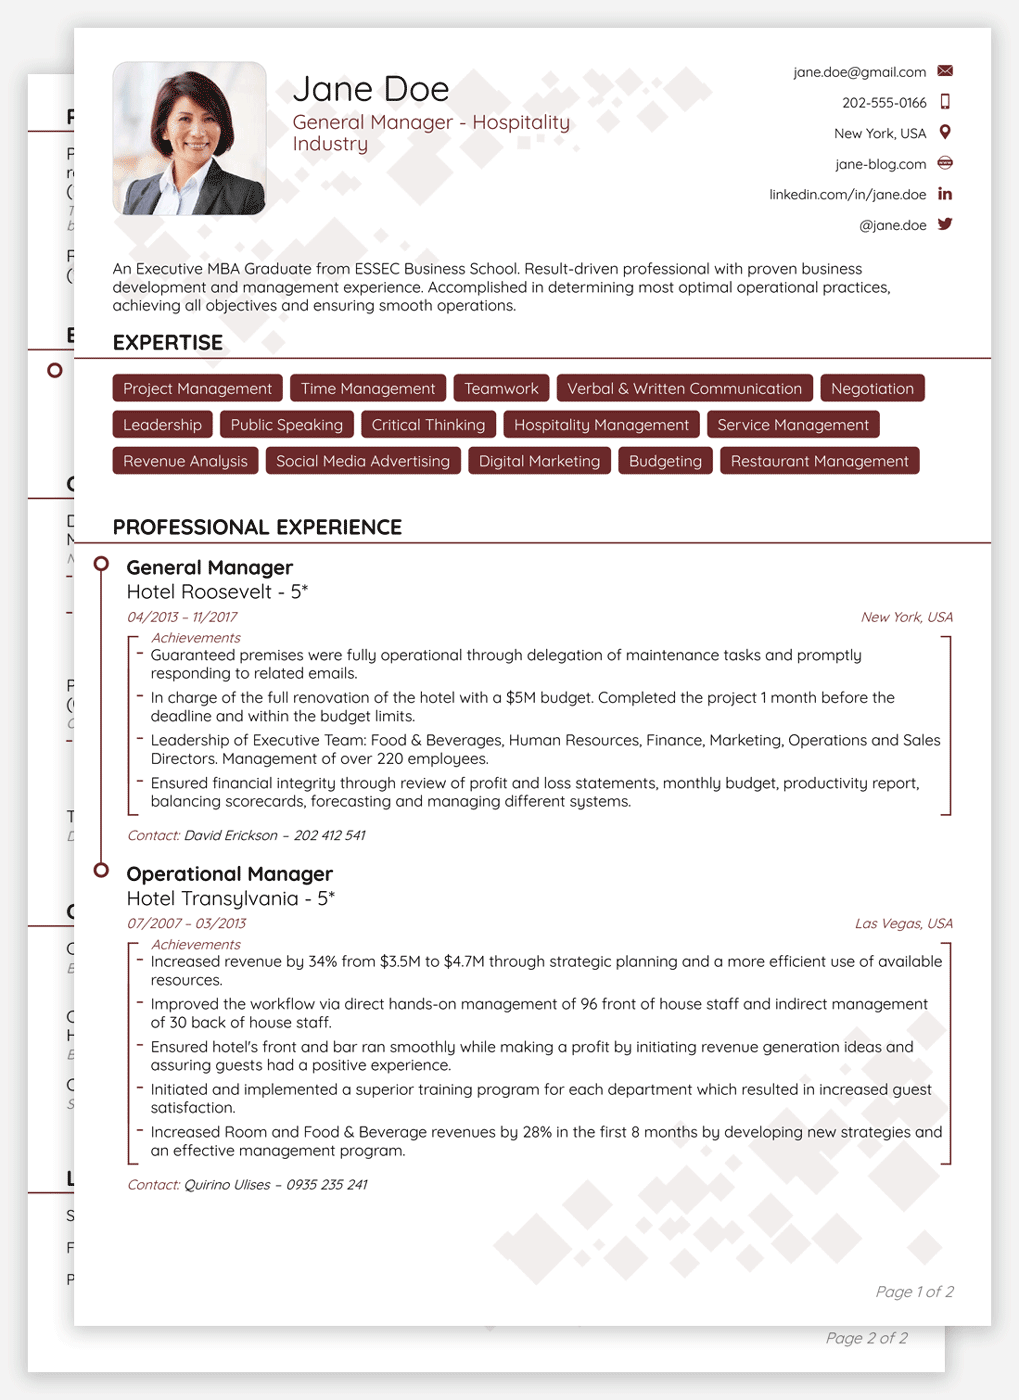 Professional Curriculum Vitae Template from mthomearts.com